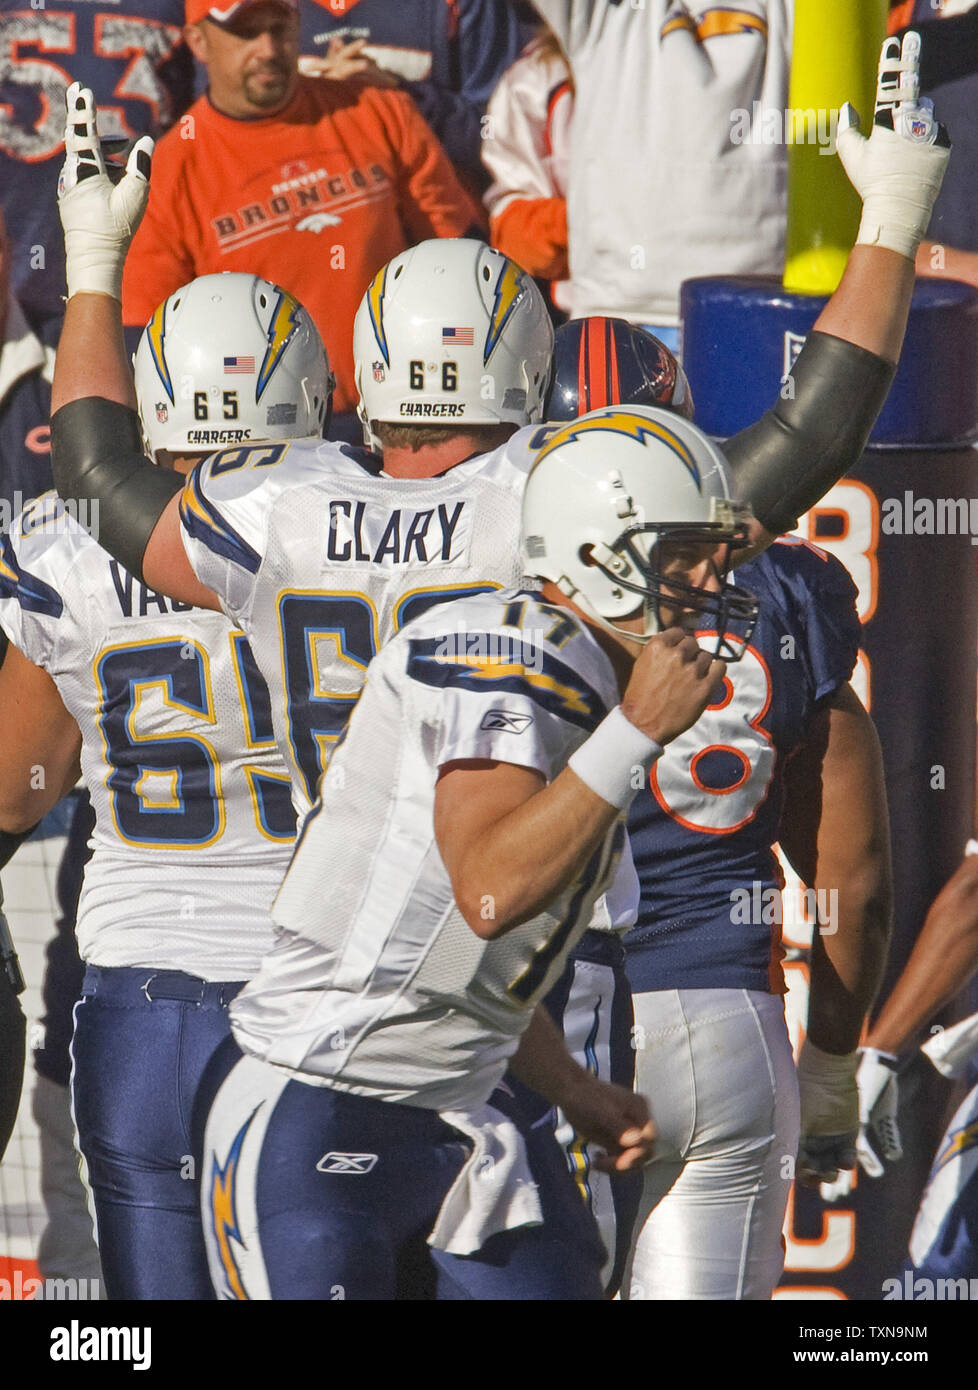 San Diego Chargers quarterback Philip Rivers celebrates throwing a touchdown pass against the Denver Broncos during the first half at Invesco Field at Mile High in Denver on November 22, 2009.  .    UPI/Gary C. Caskey... Stock Photo